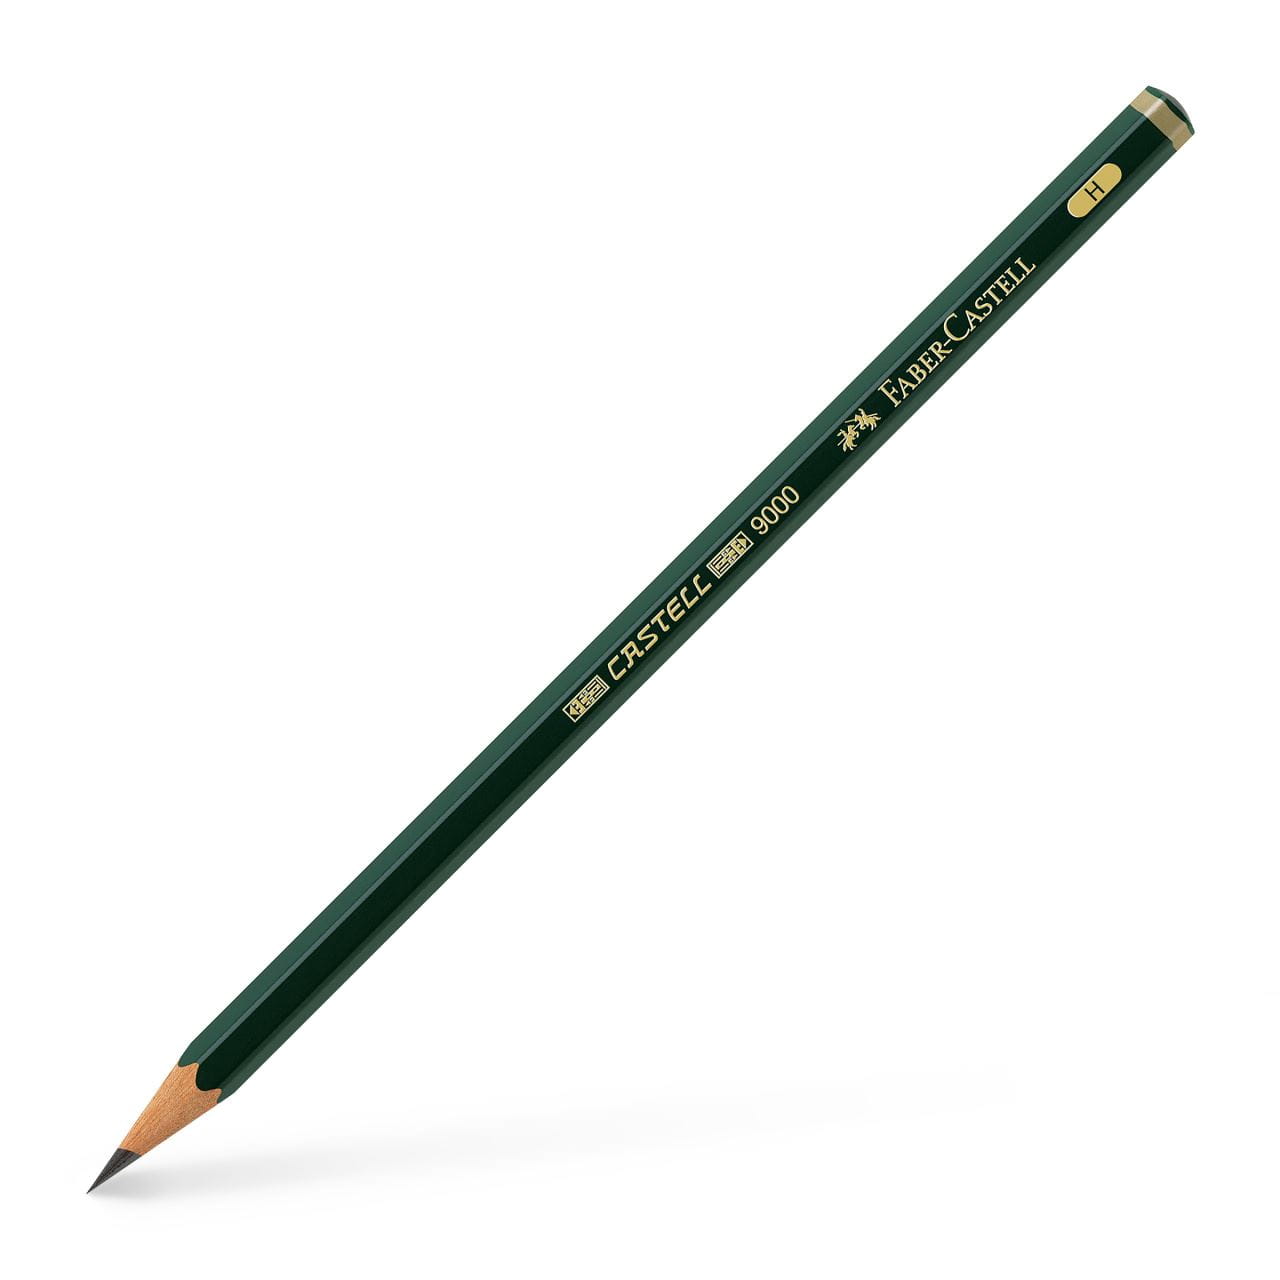 Faber-Castell - Crayon graphite Castell 9000 H